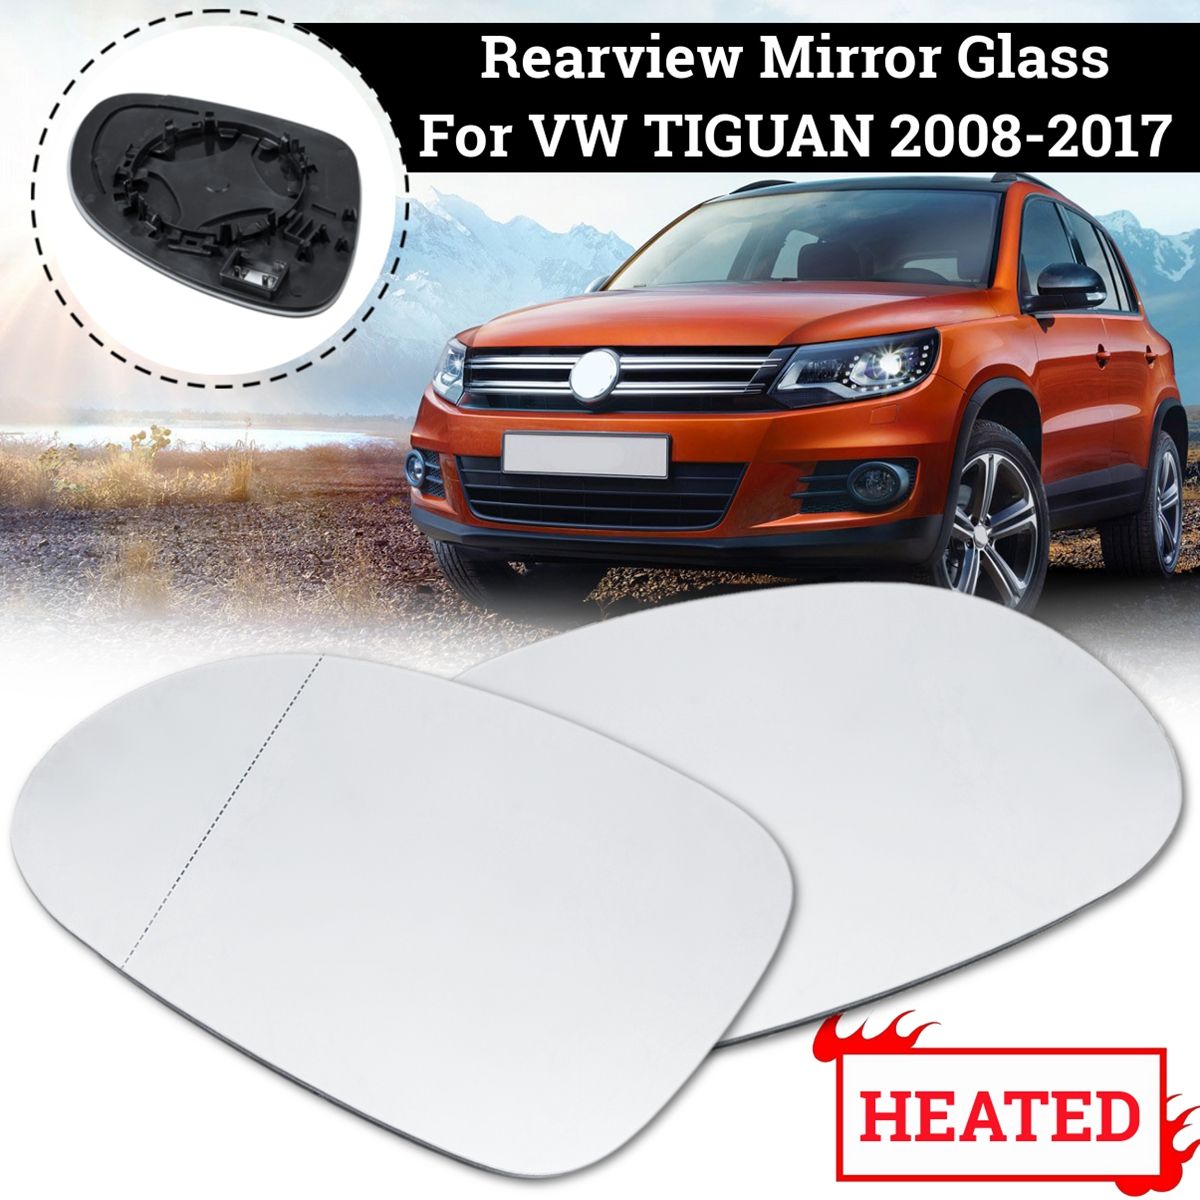 LeftRight-Antifog-Heated-Rearview-Mirror-Glass-For-VW-Tiguan-Sharan-Seat-Alhanbra-1661445